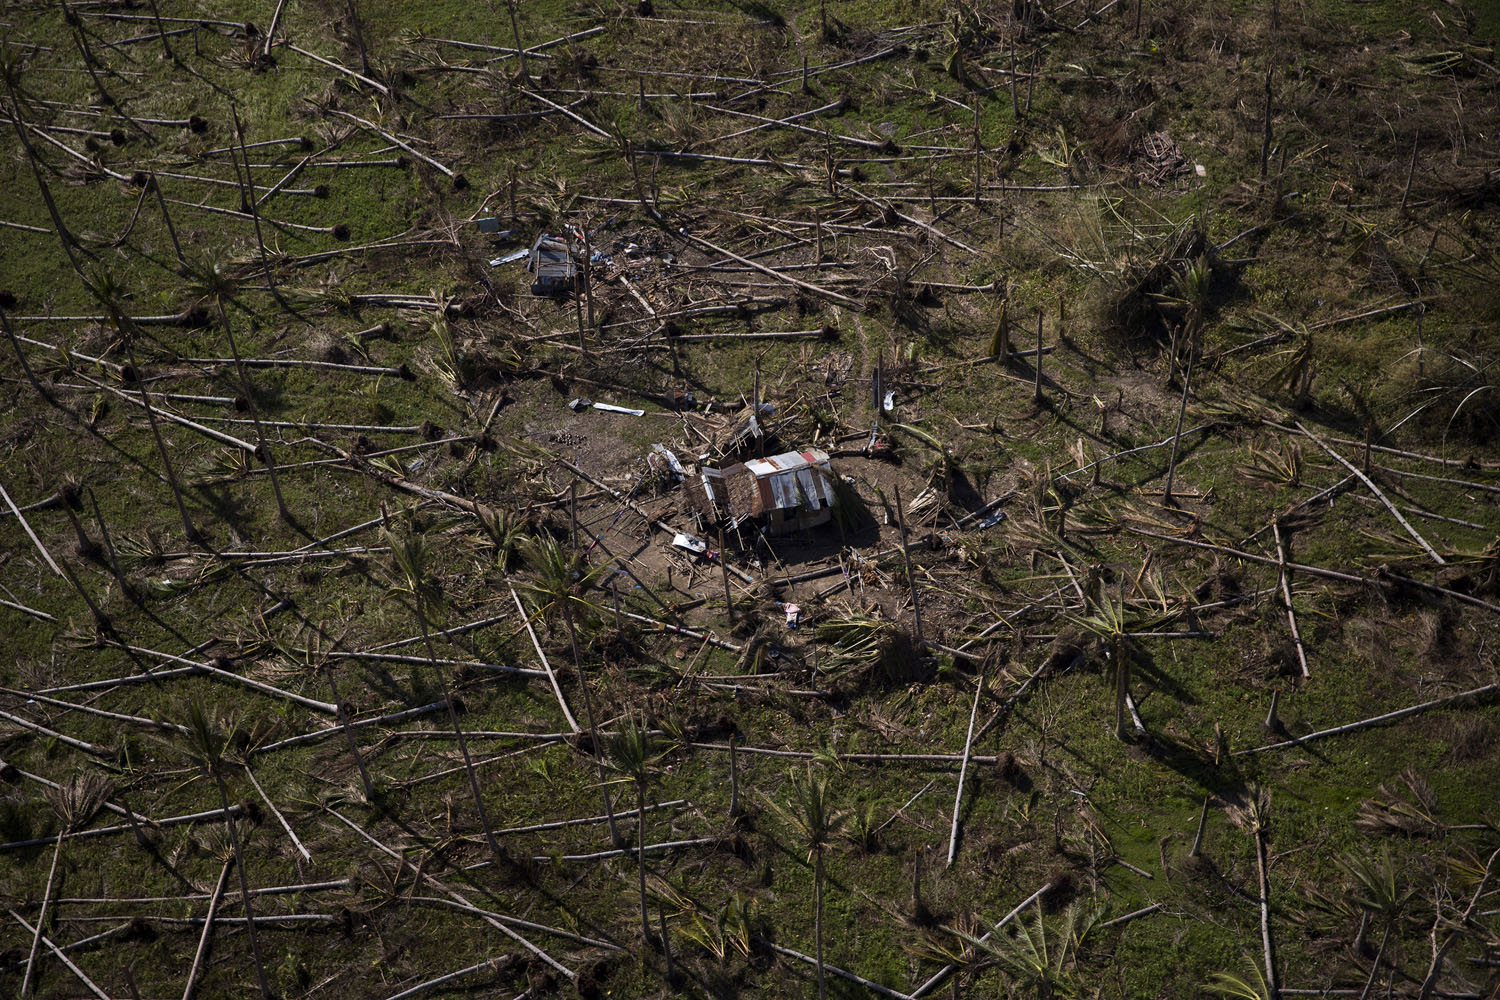 An aerial view the countryside near Tacloban that was effected by Haiyan Typhoon in Tacloban, The Philippines on November 18, 2013.